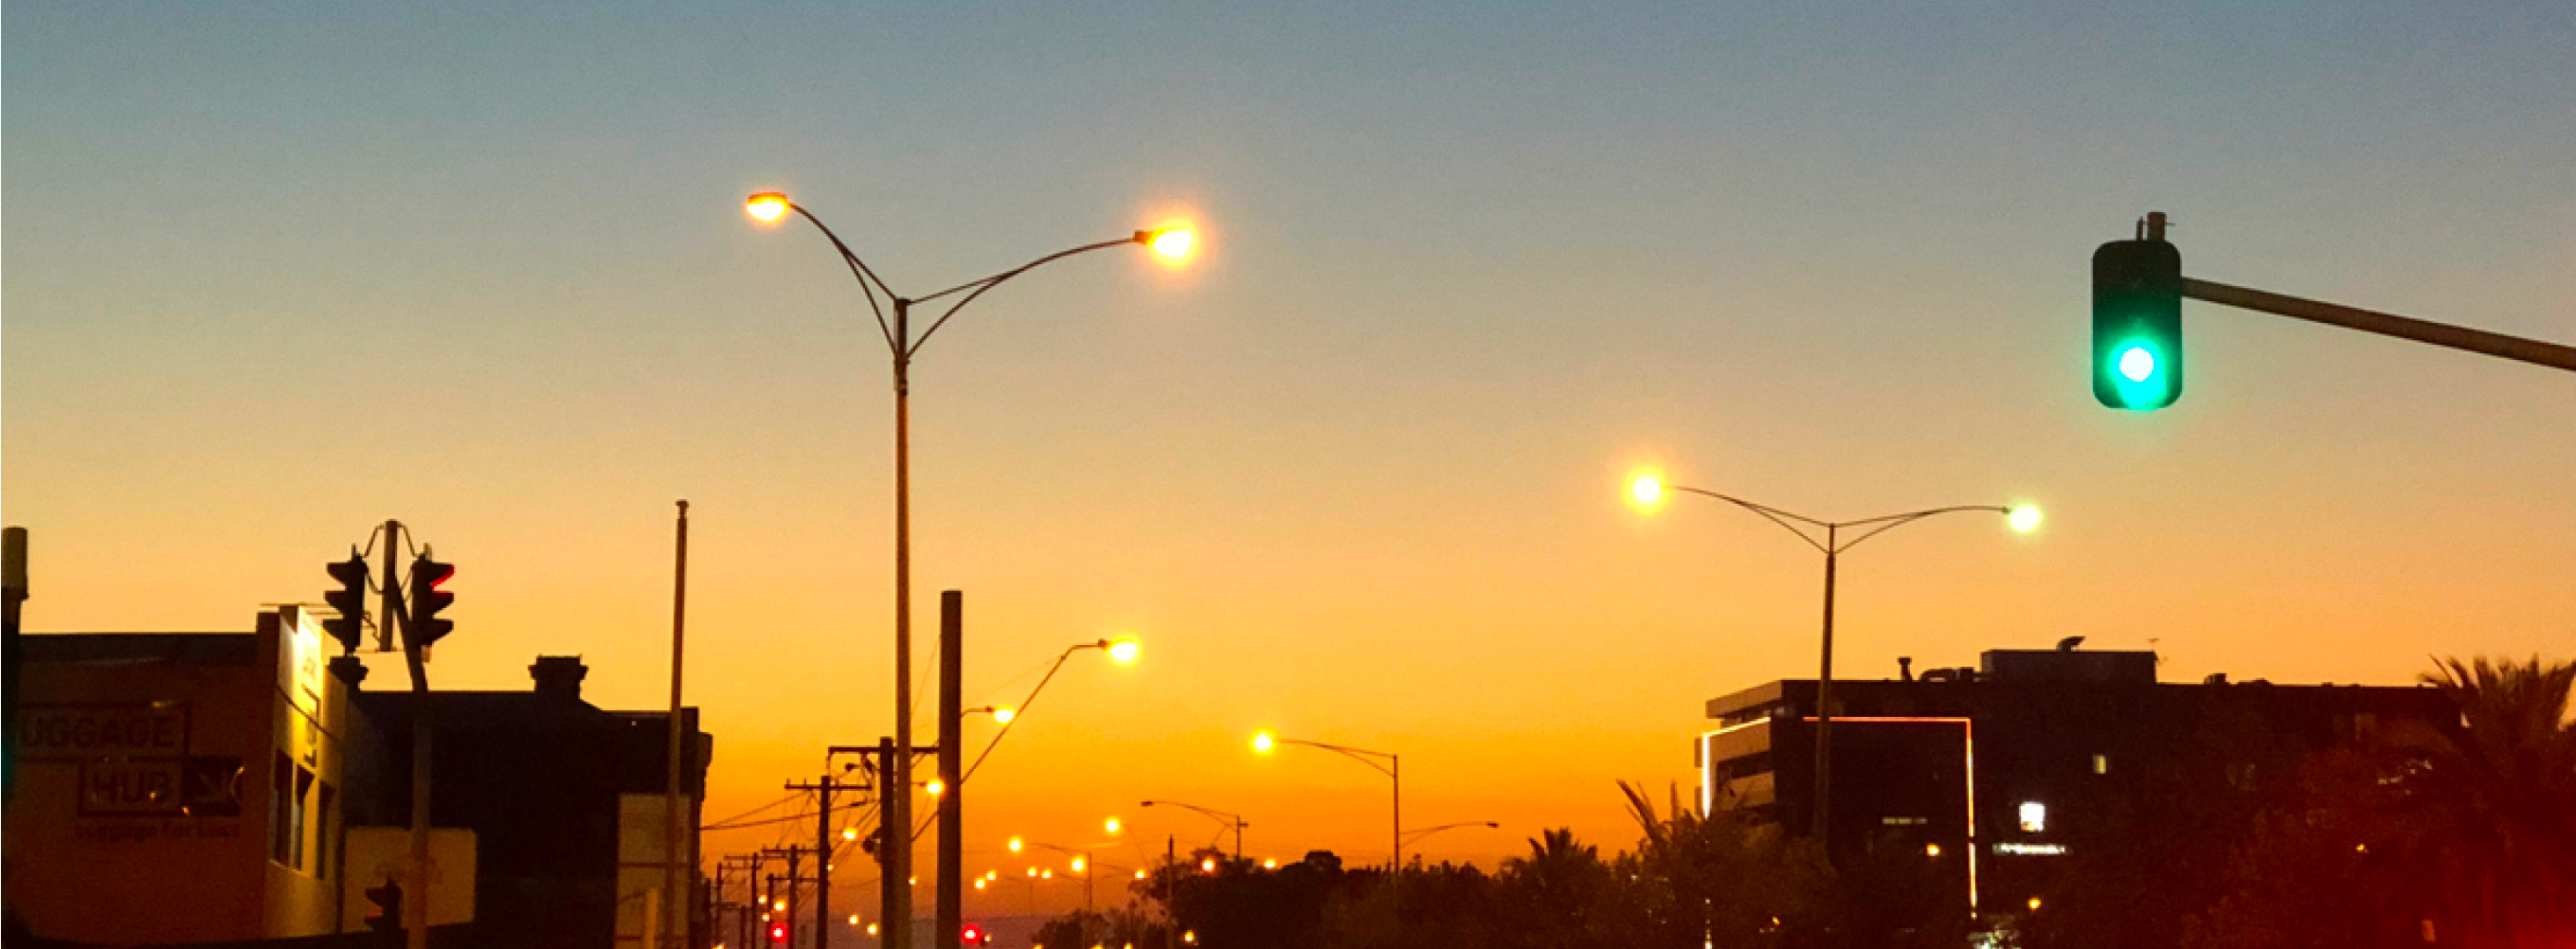 Skyline of a street at sunset with streetlights on